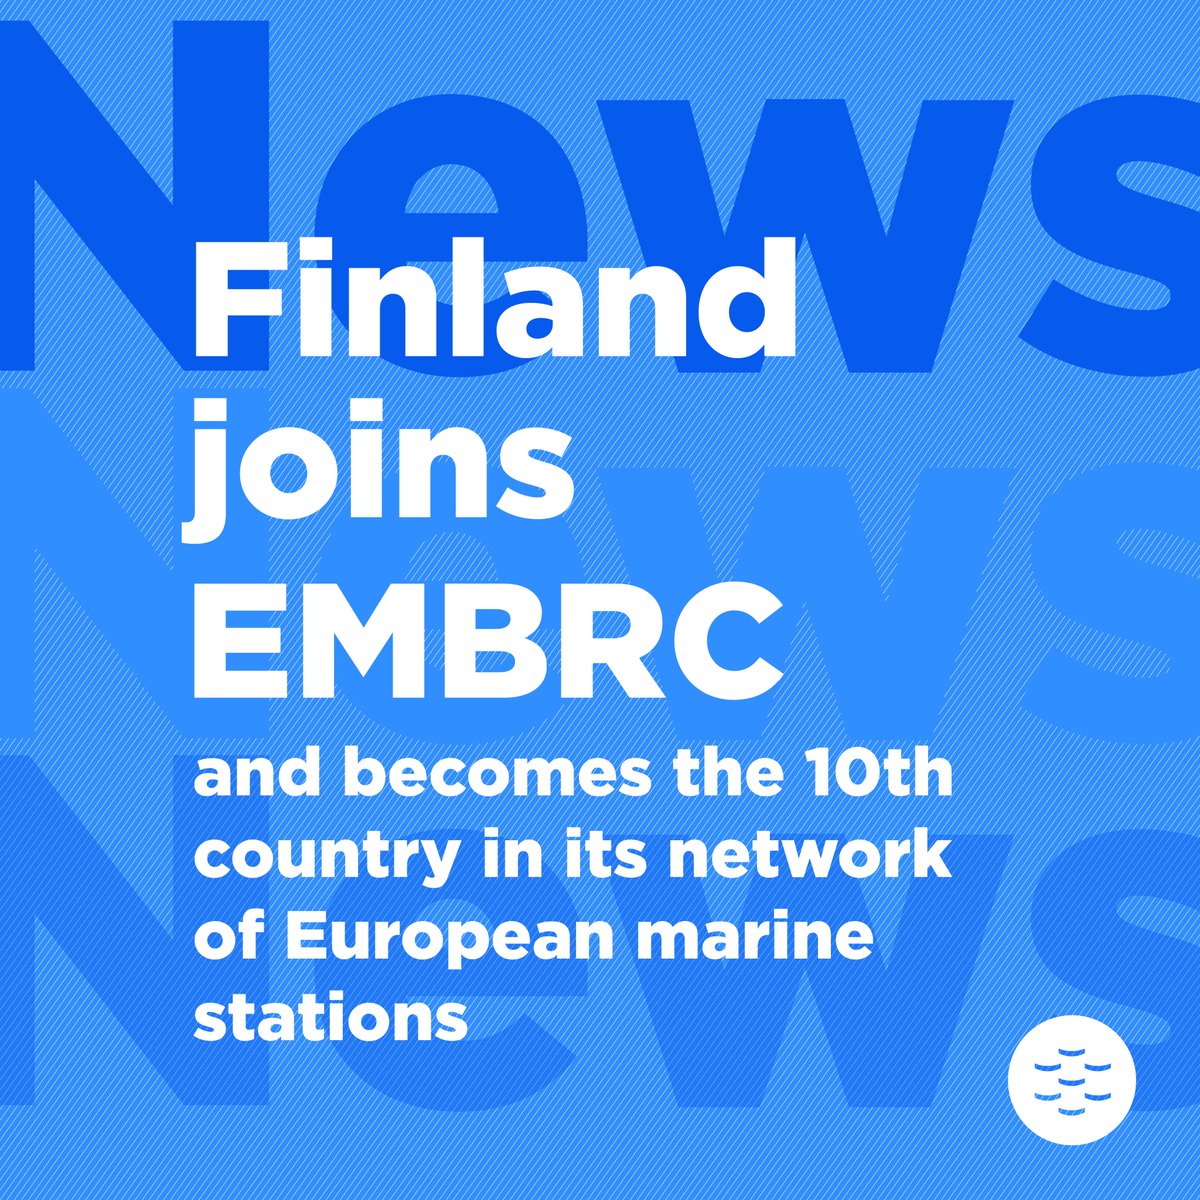 #EMBRCNews | 👉 📢 Welcome #EMBRCFinland to the EMBRC #ResearchInfrastructure

📢 We’re looking forward to working with our new partners @FINMARI1 @Tvarminne, the Archipelago Research Institute at Seili, Husö Biological Station & @SYKEint’s marine labs

🔗 tinyurl.com/bj6eku8j